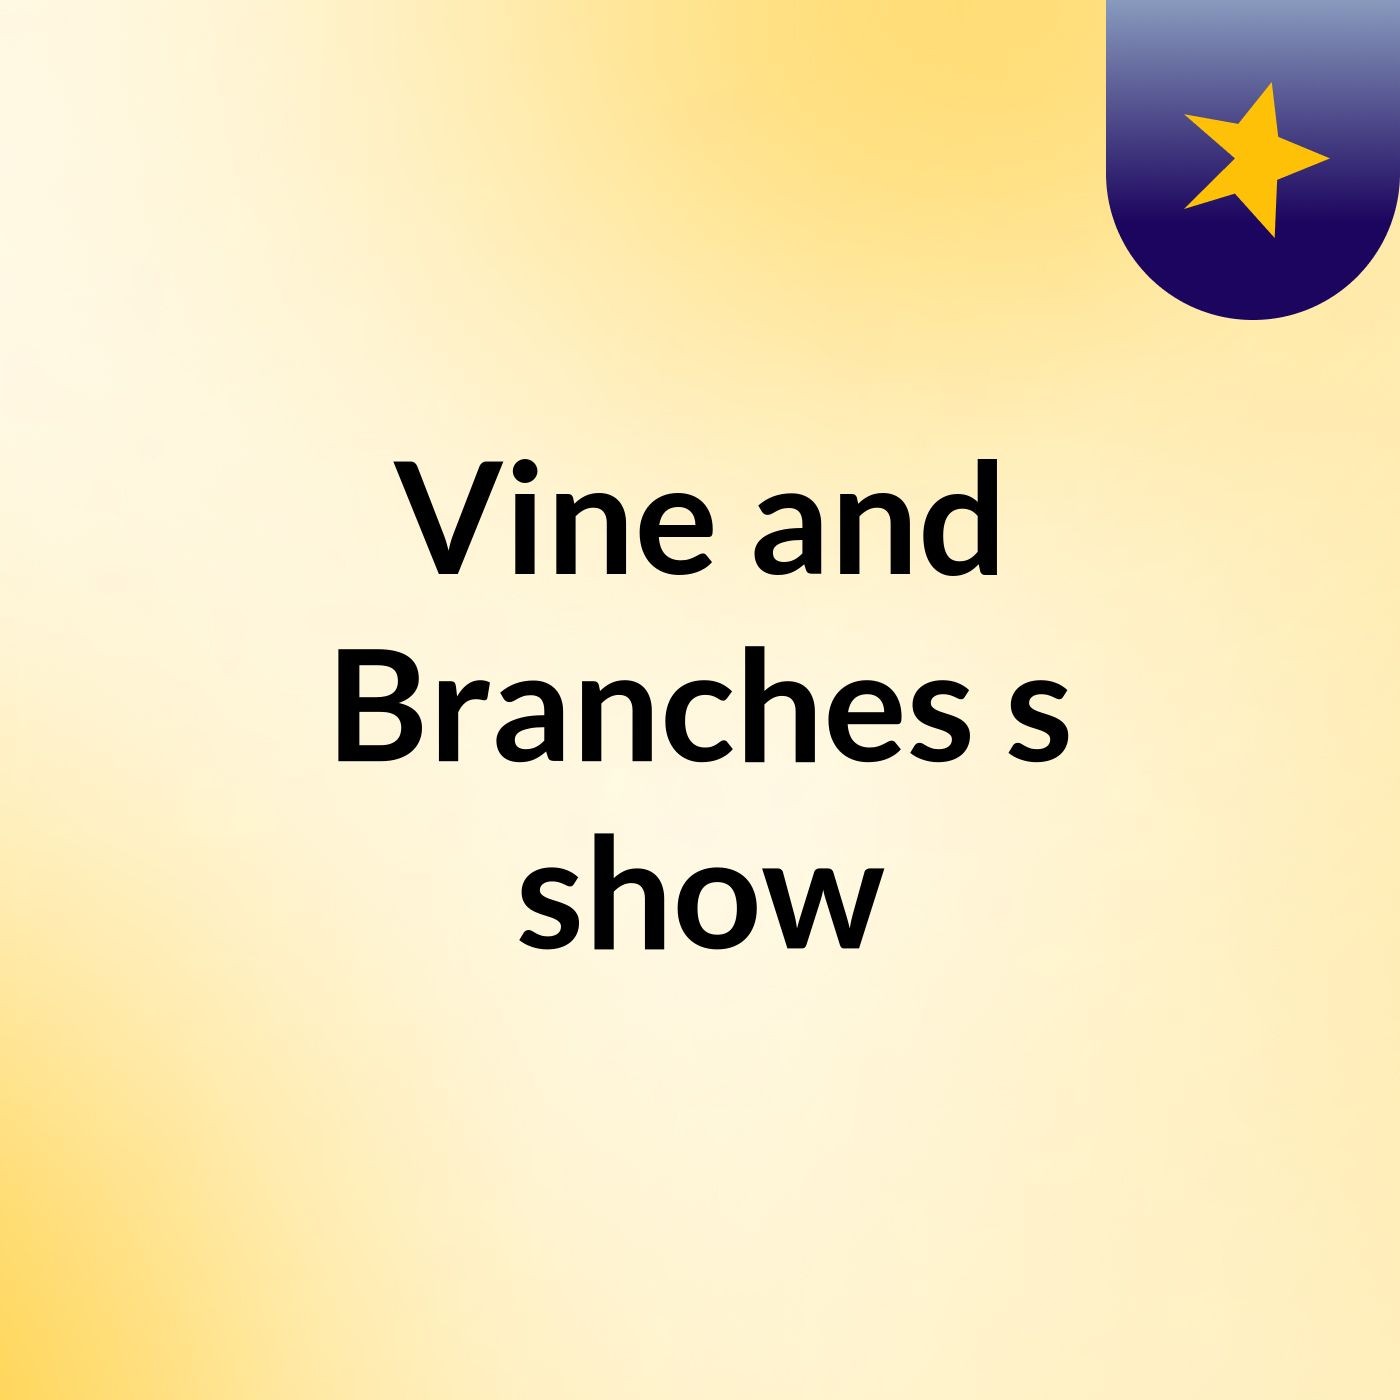 Vine and Branches's show